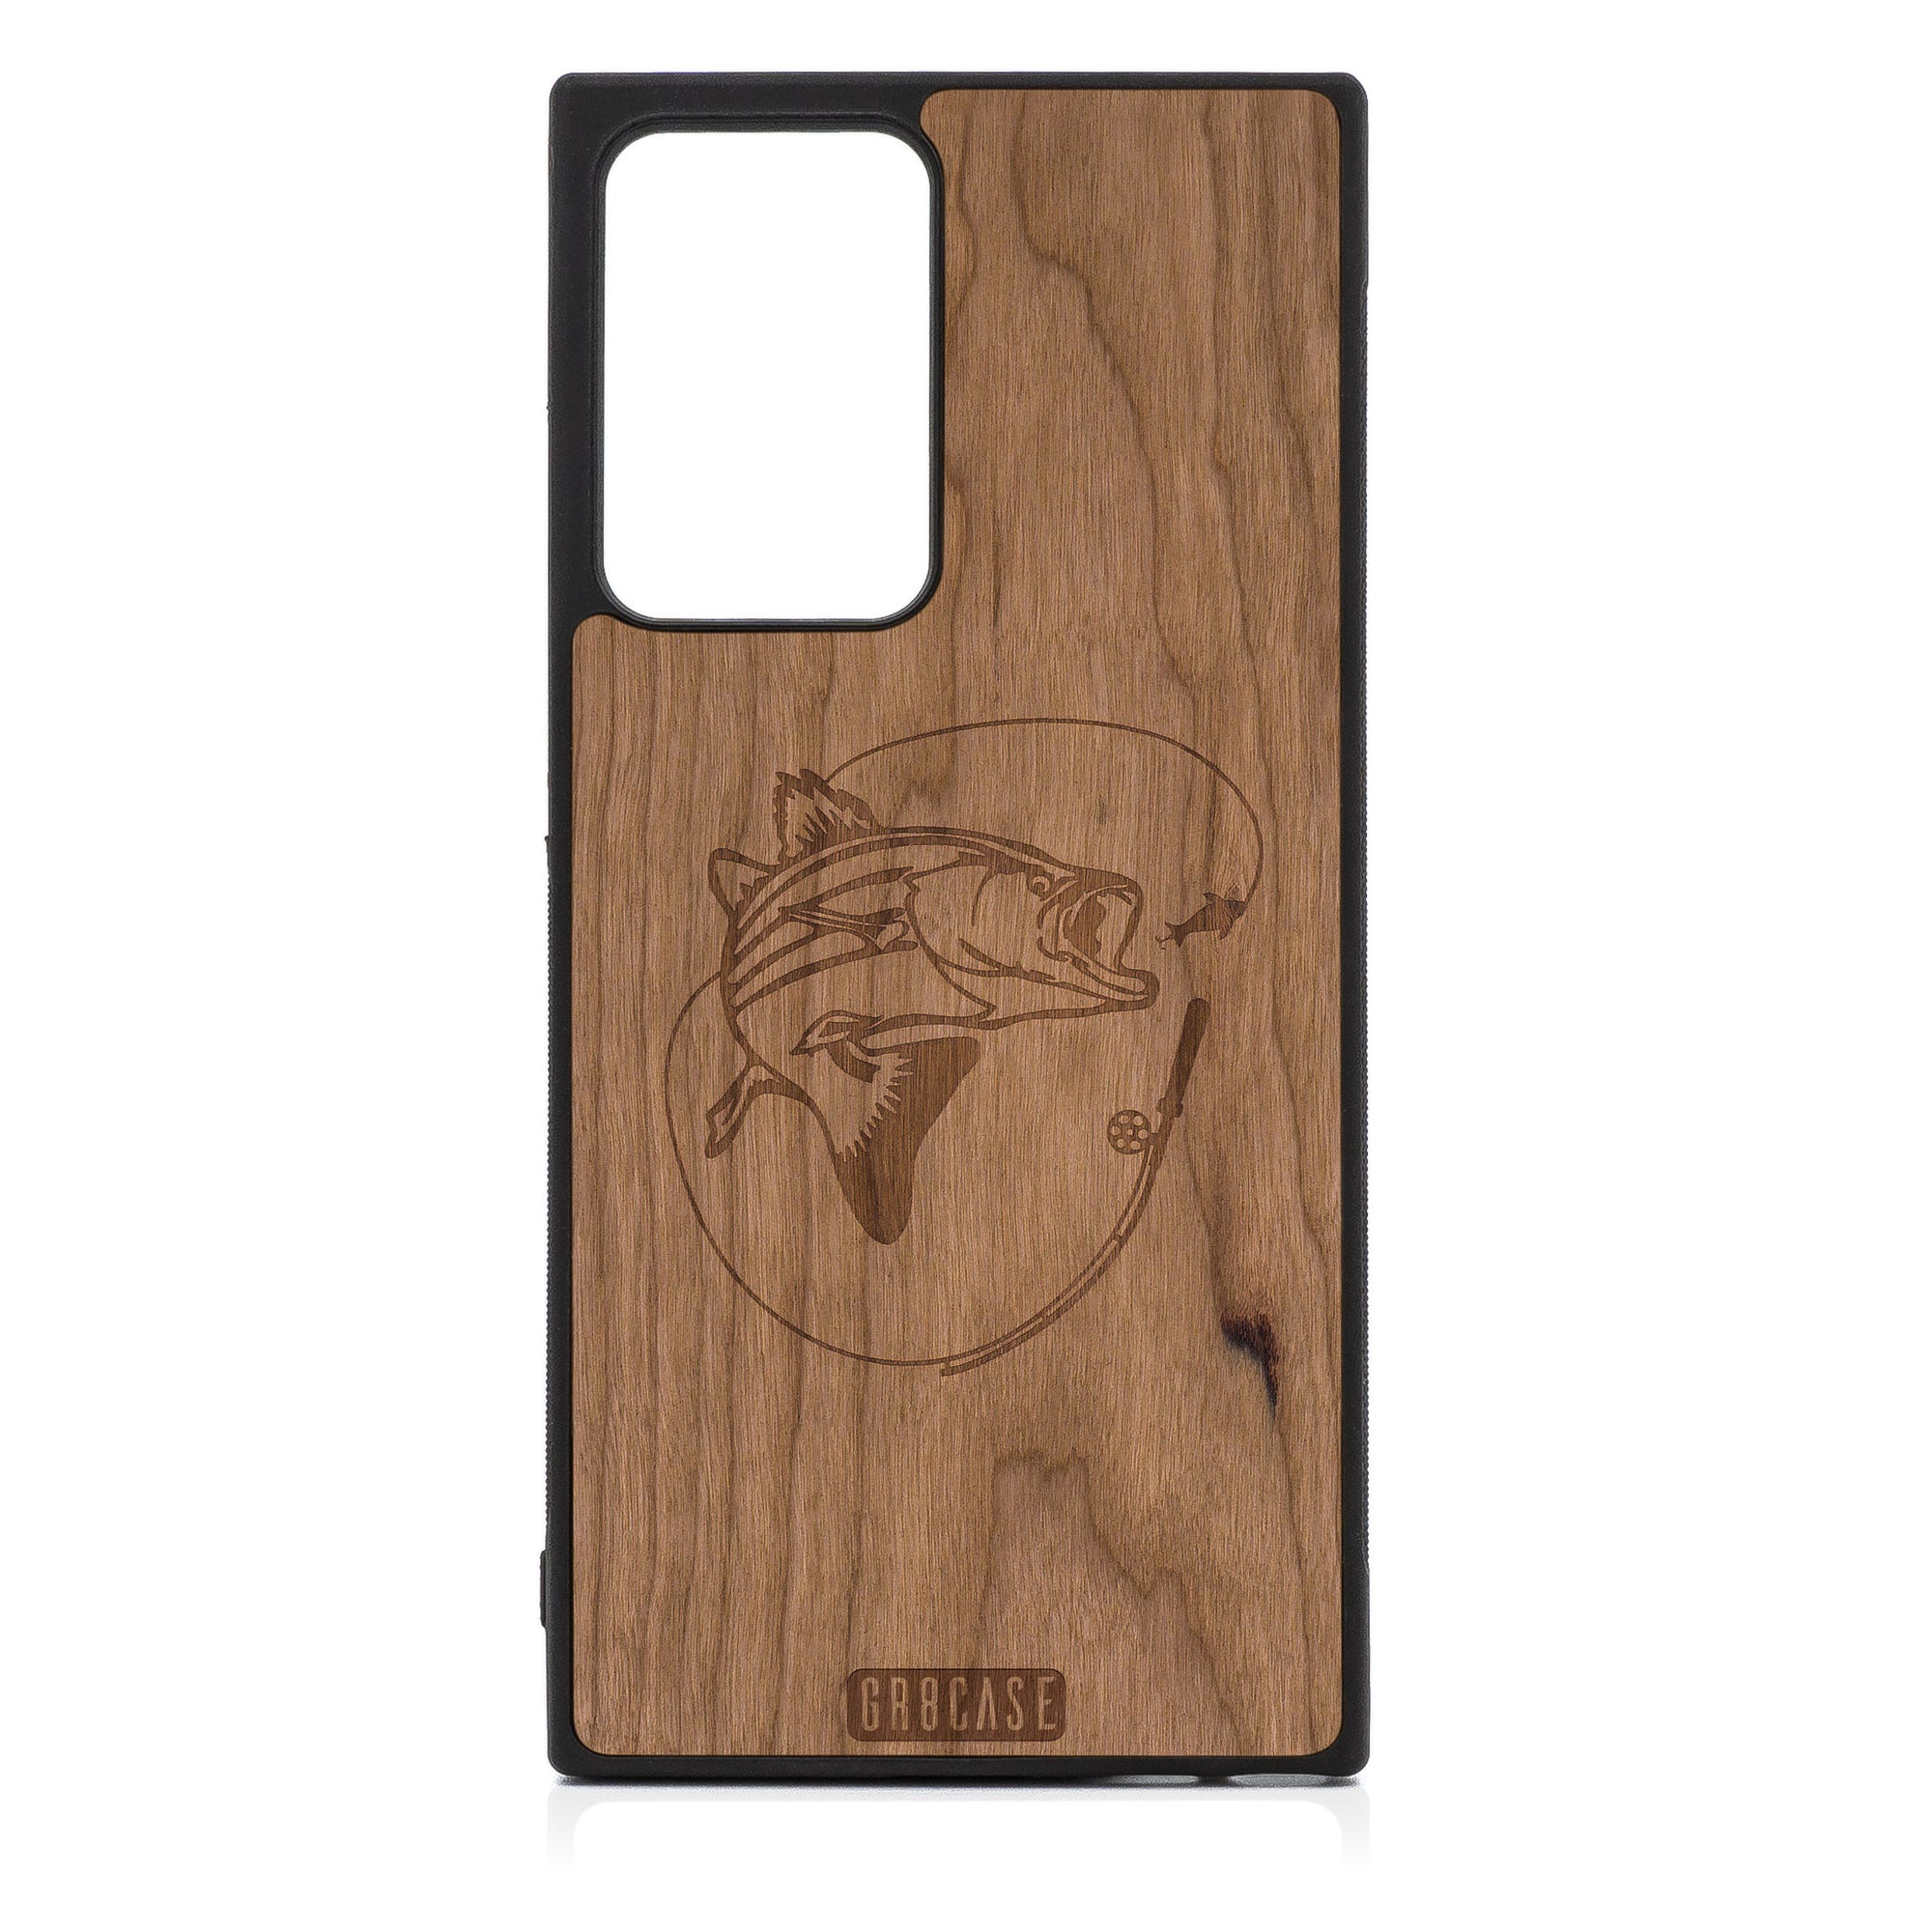 Fish and Reel Design Wood Case For Samsung Galaxy Note 20 Ultra